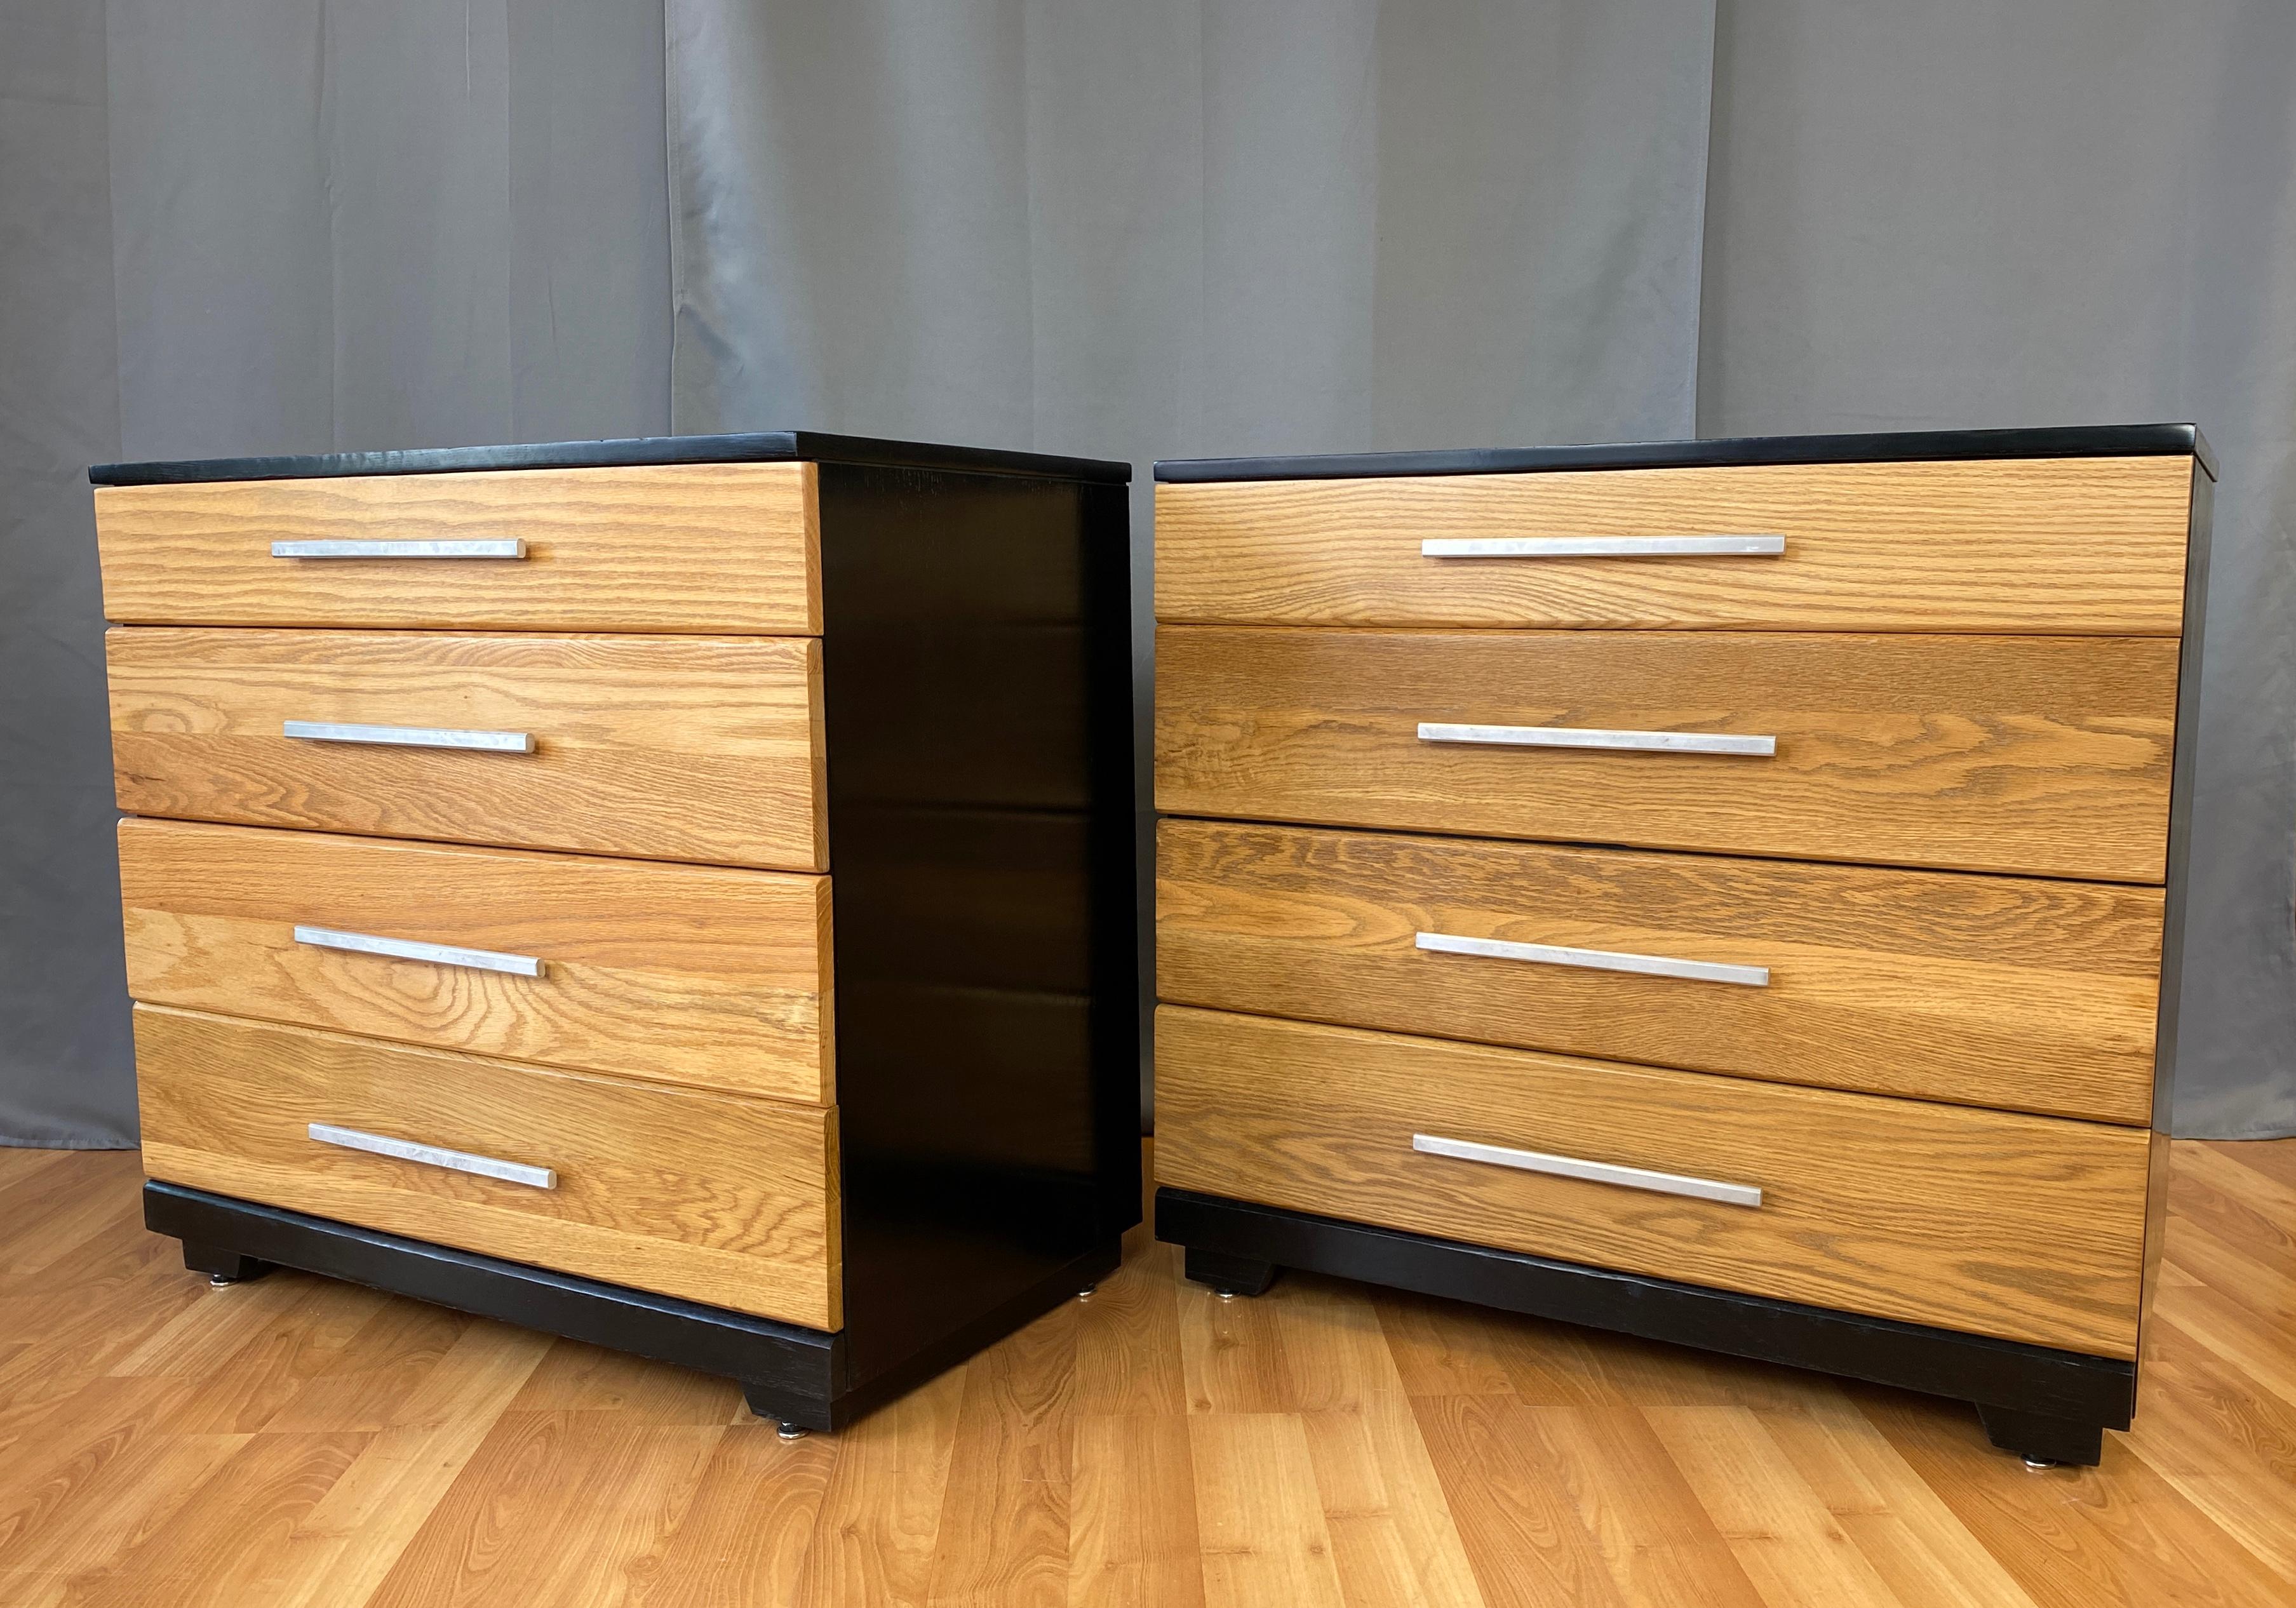 A pair of handsome Raymond Loewy designed dressers for Mengel, circa 1950s 
Both dressers have a nice contrast finish, natural oak and then ebonized black main body. Aluminum handles on each of the four drawers.
